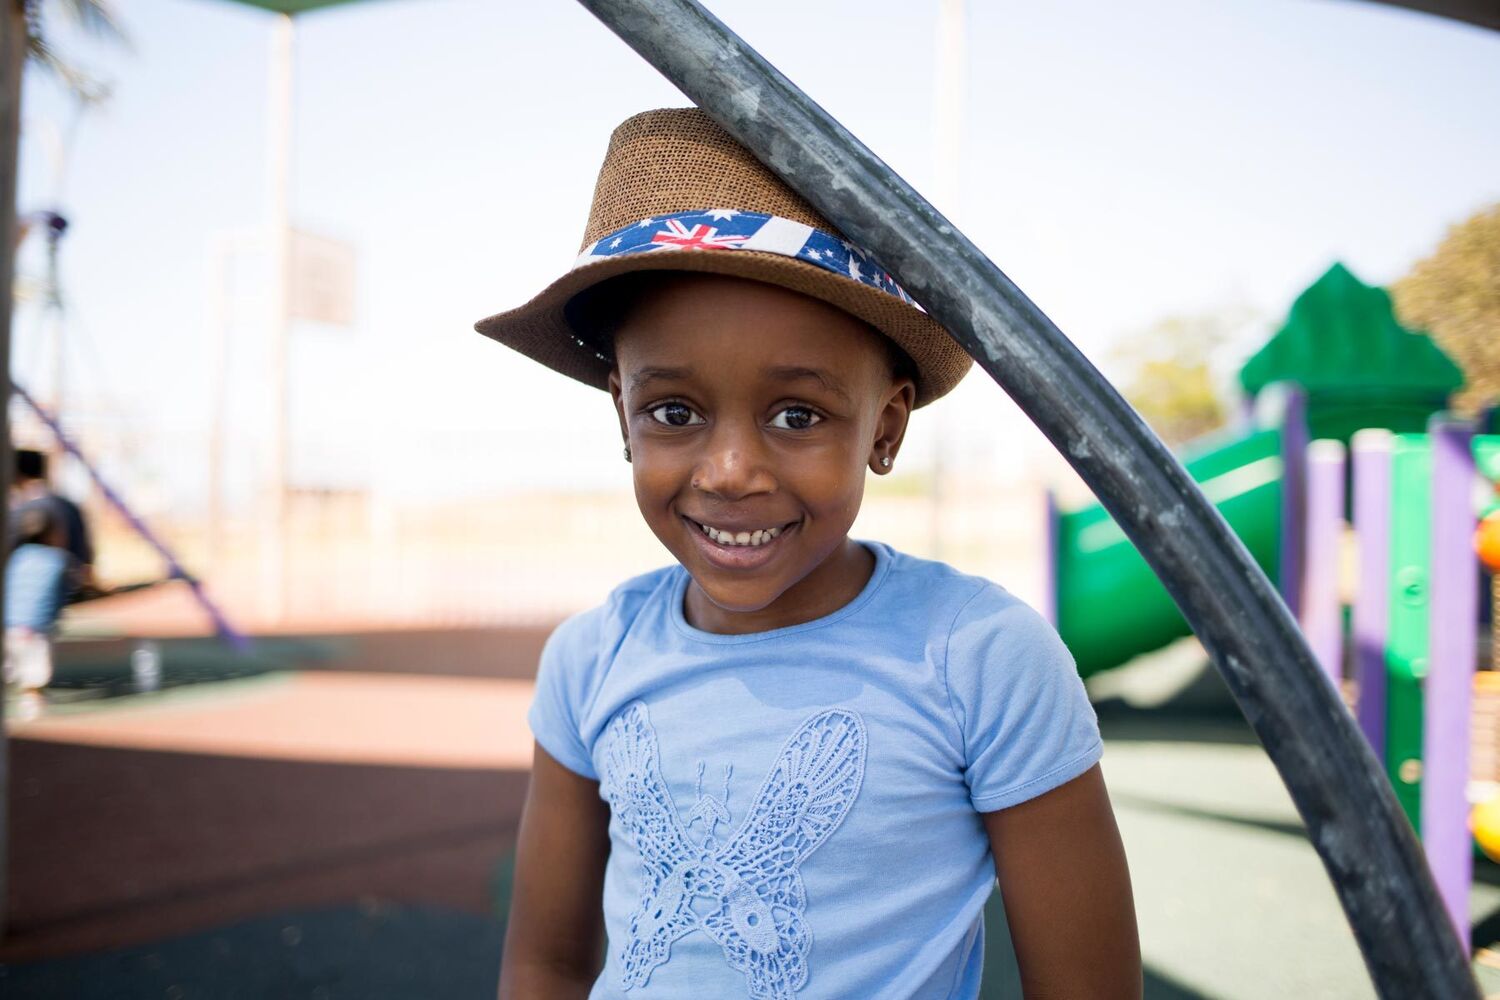 Young Aboriginal Girl In Blue Shirt And Hat Standing In A Park Smiling